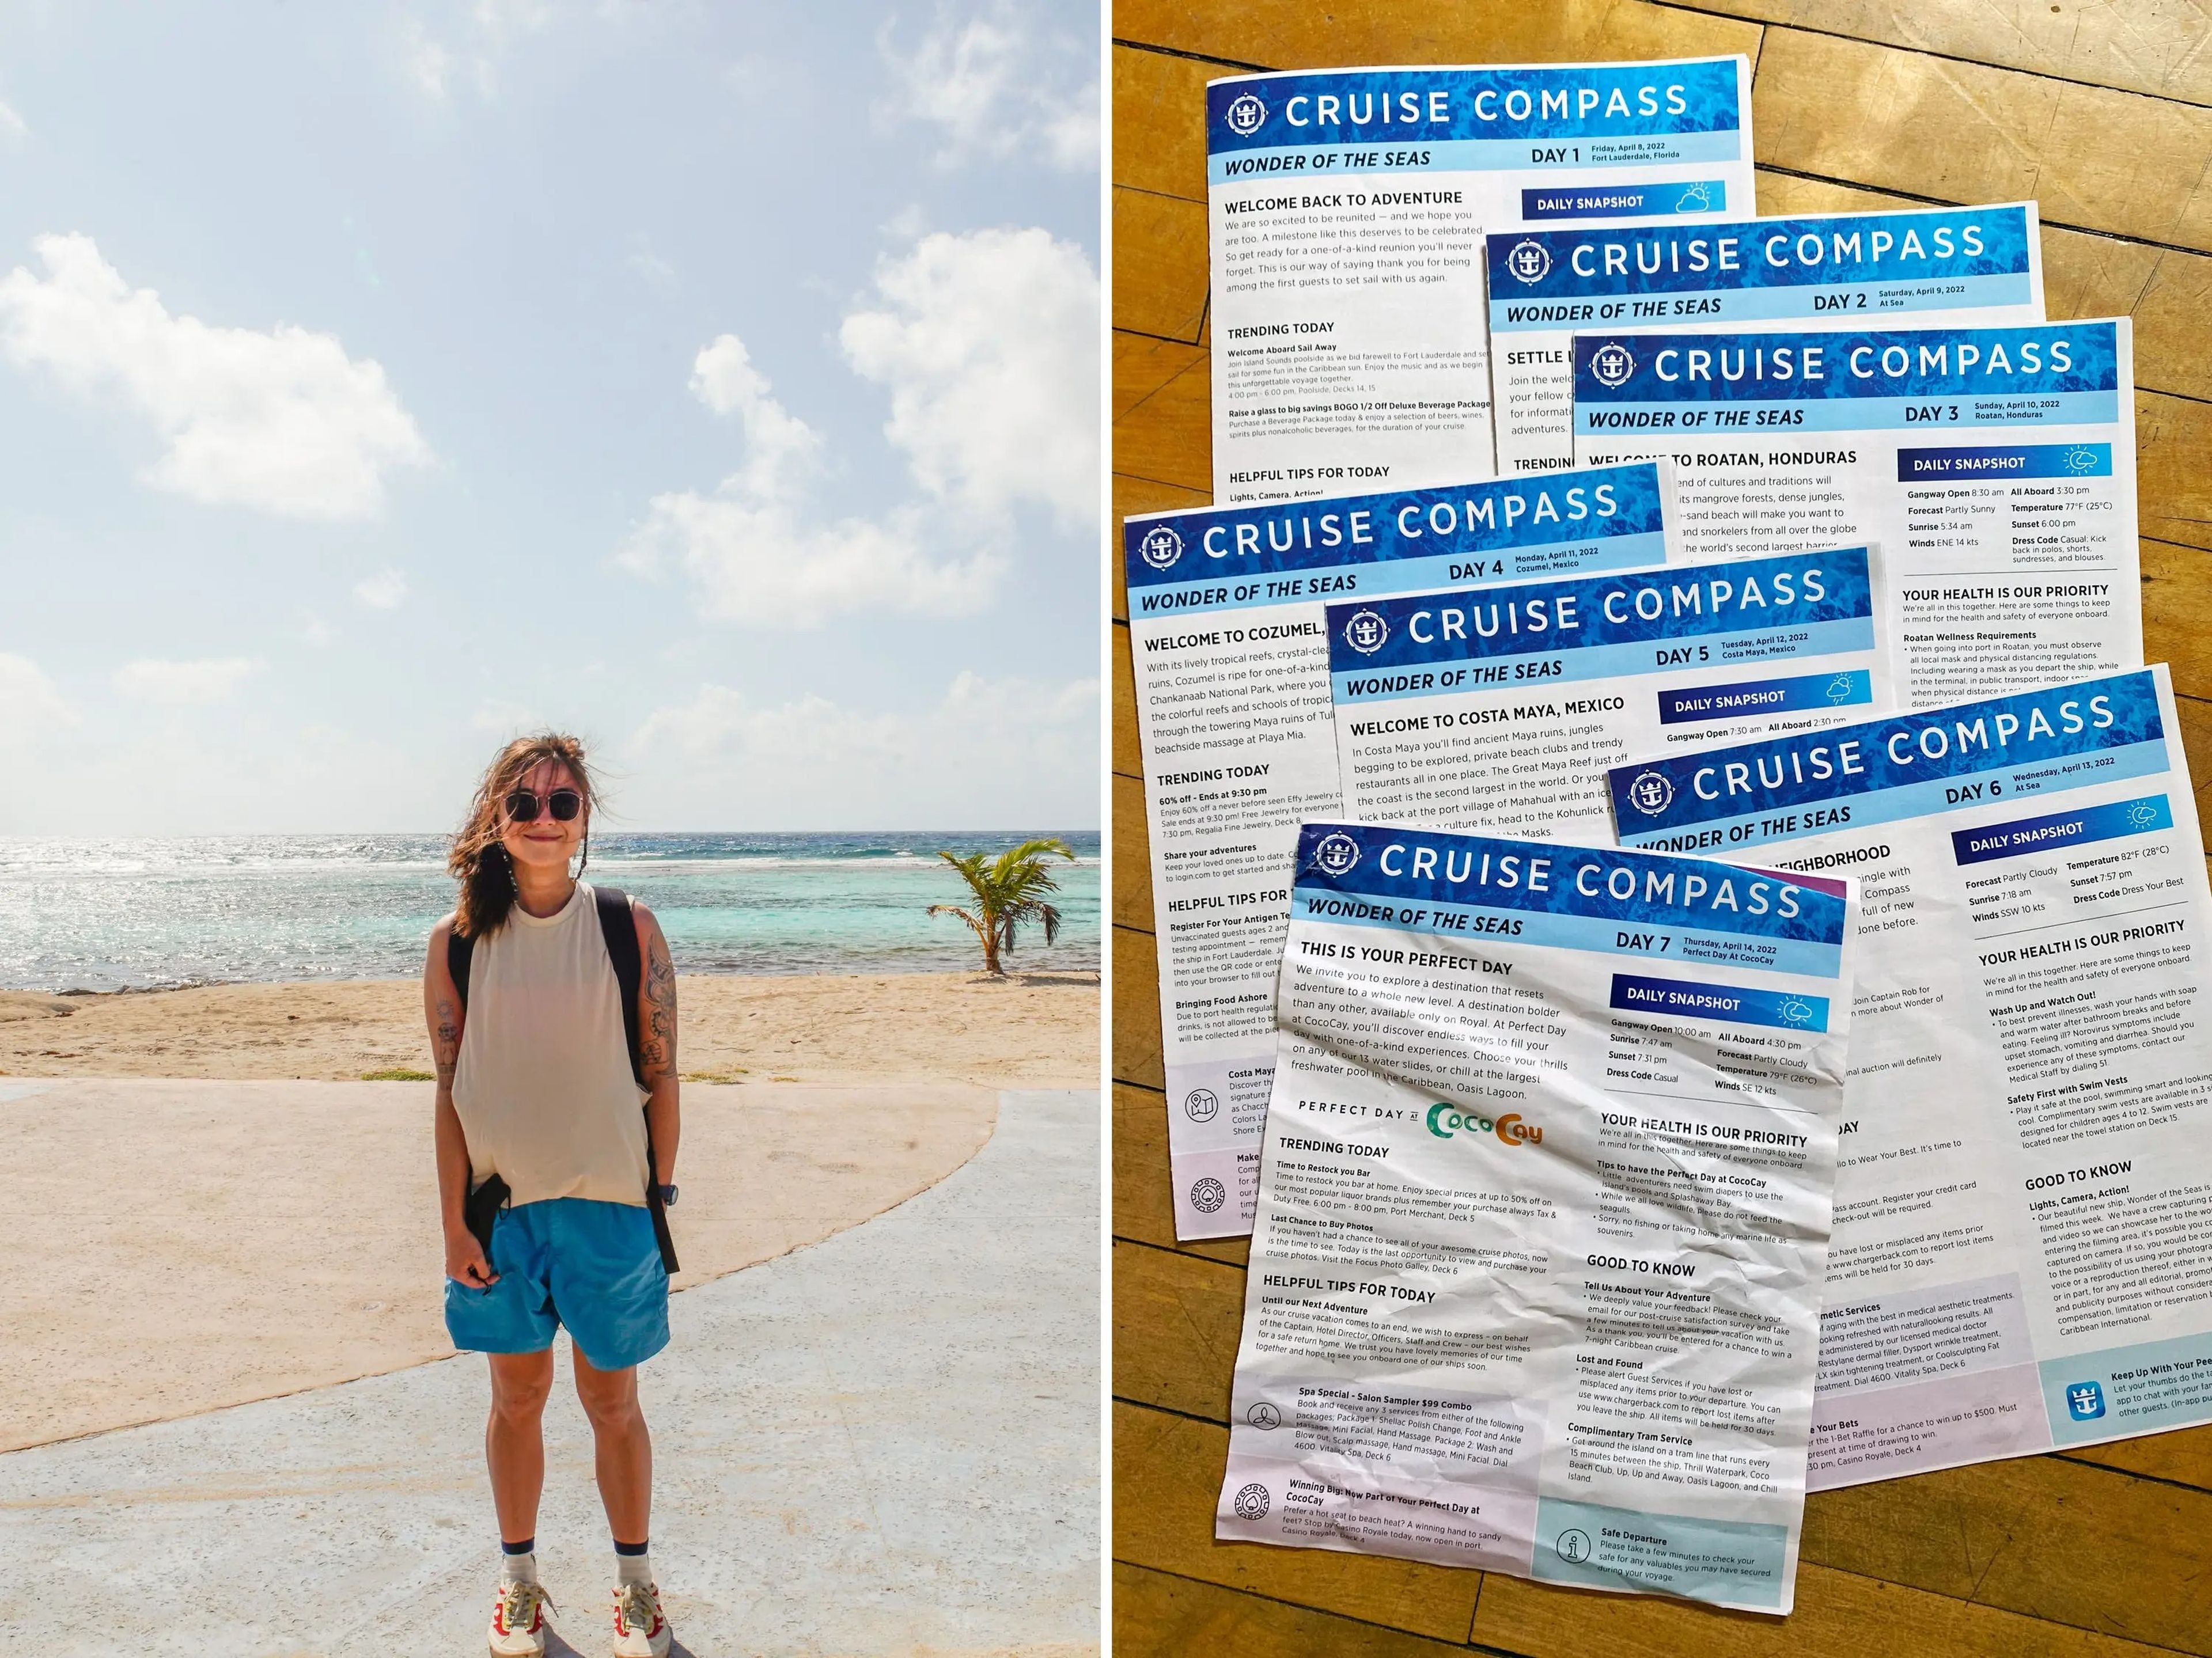 The author in front of a beach (L) and seven days of cruise compass issues on a wood floor (R))